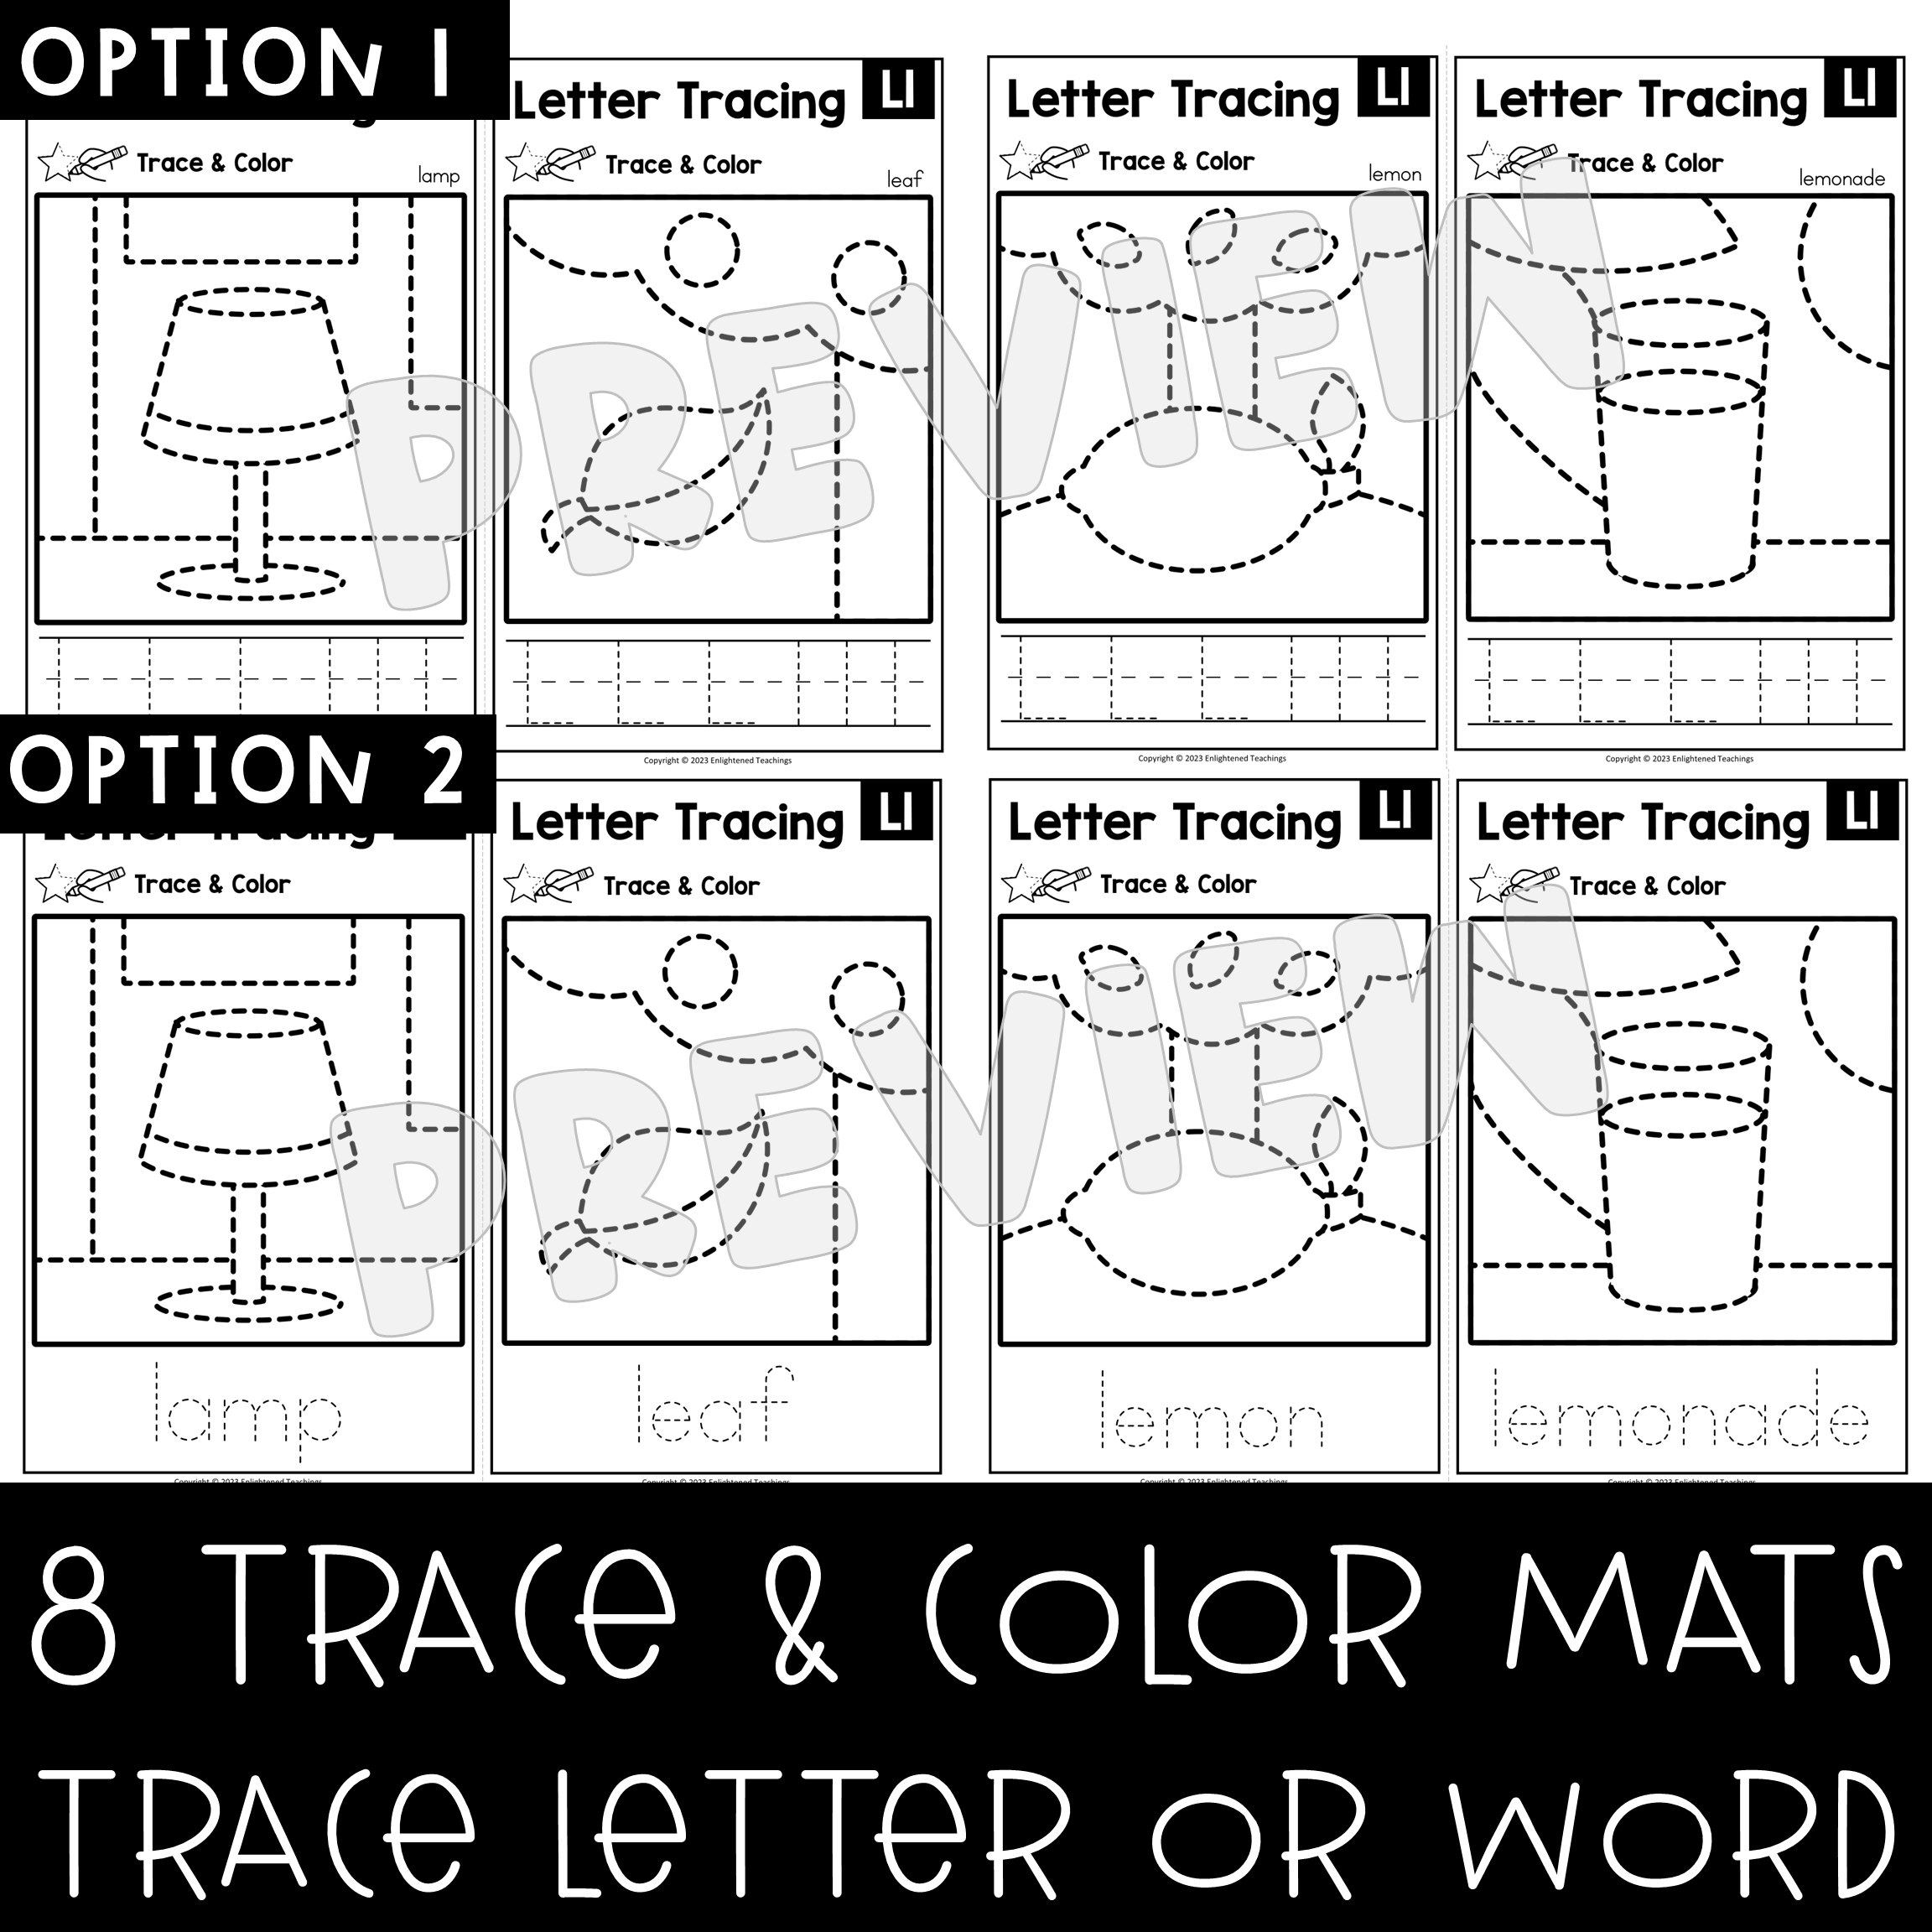 Letter l tracing worksheets letter tracing mats letter l trace color made by teachers